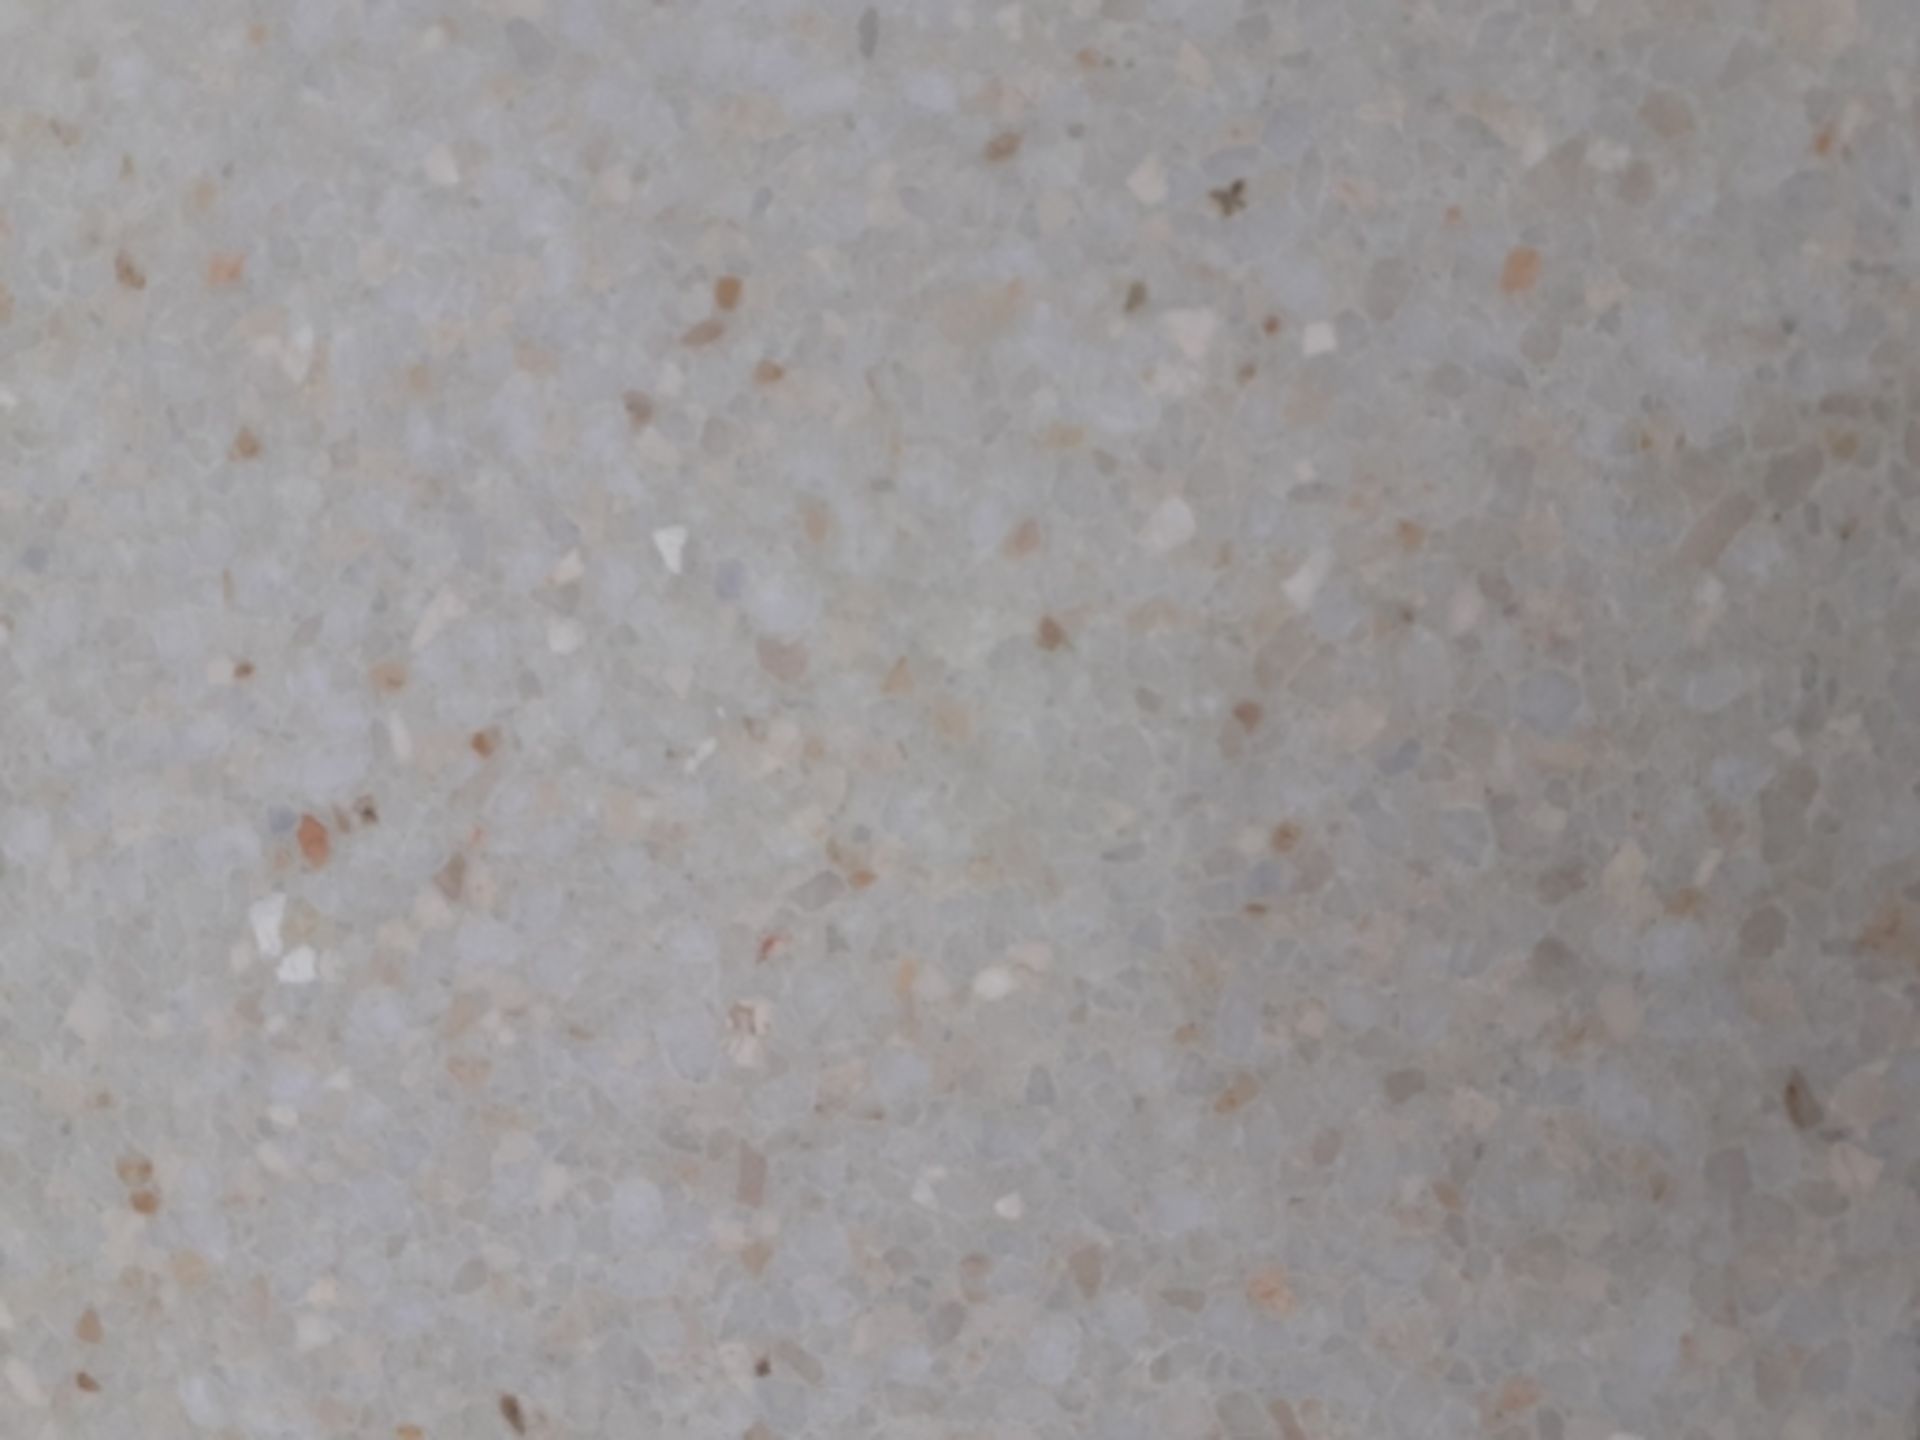 1 PALLET OF BRAND NEW TERRAZZO COMMERCIAL FLOOR TILES (Z30011), COVERS 24 SQUARE YARDS *PLUS VAT* - Image 7 of 14